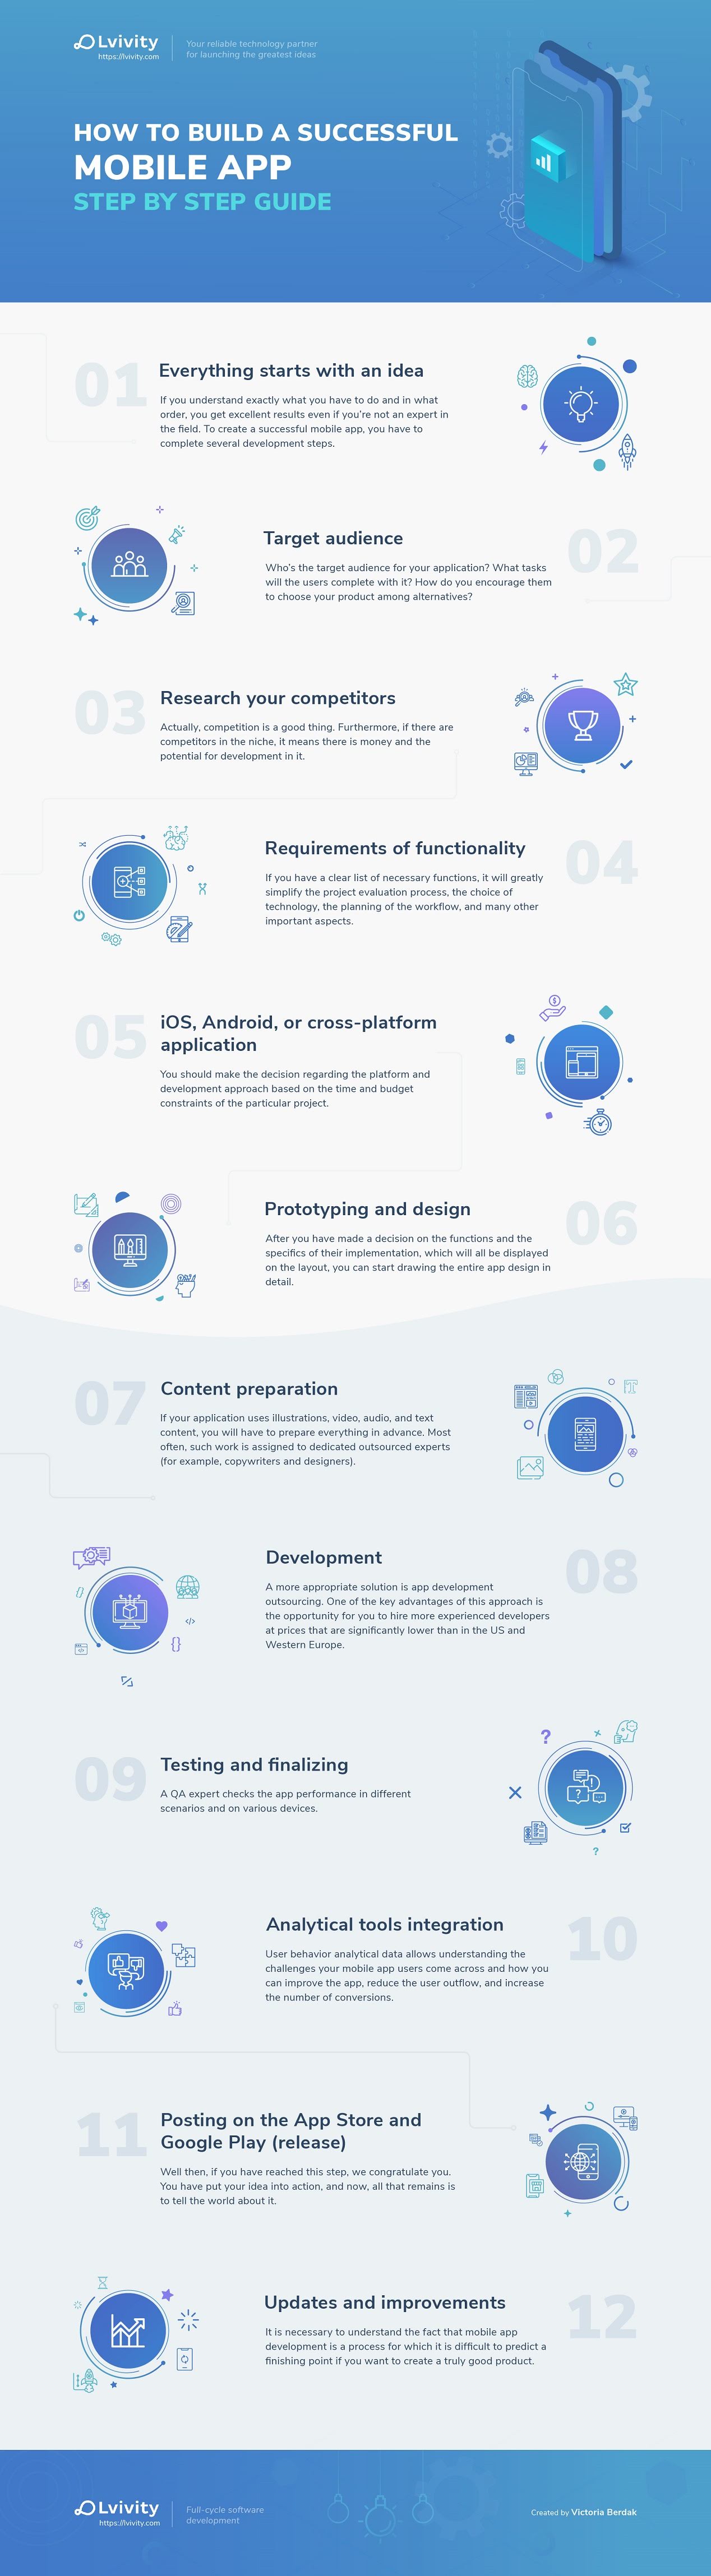 What the Mobile App Development Process Looks Like #infographic